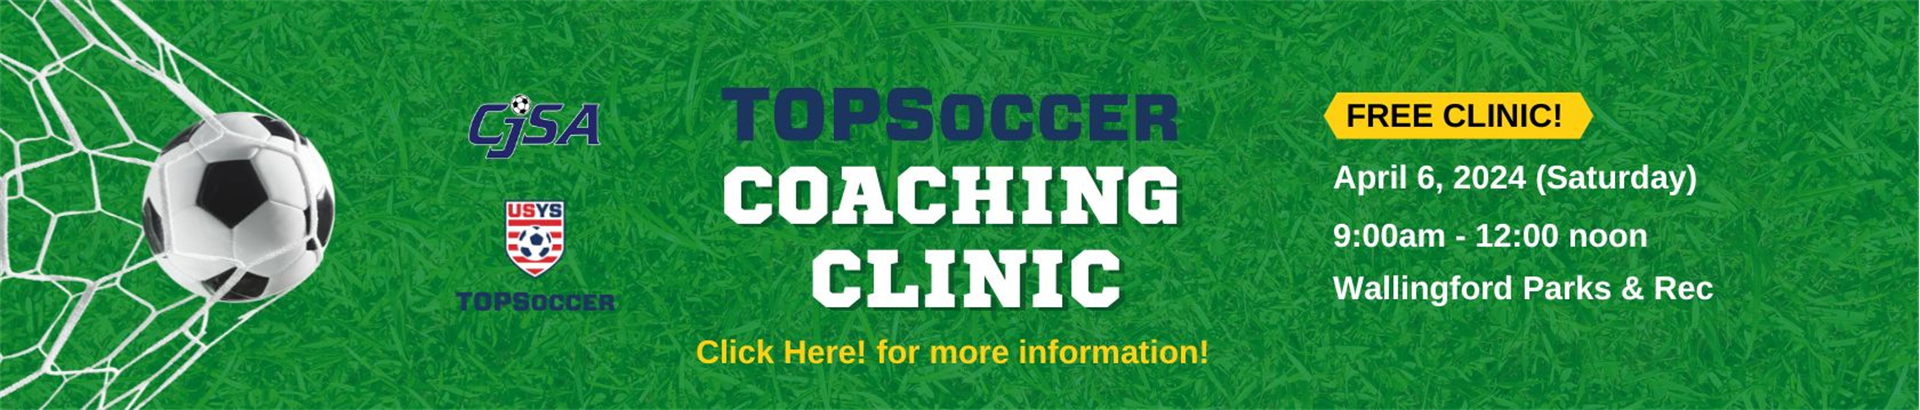 TOPSoccer Coaches Clinic April 6th!